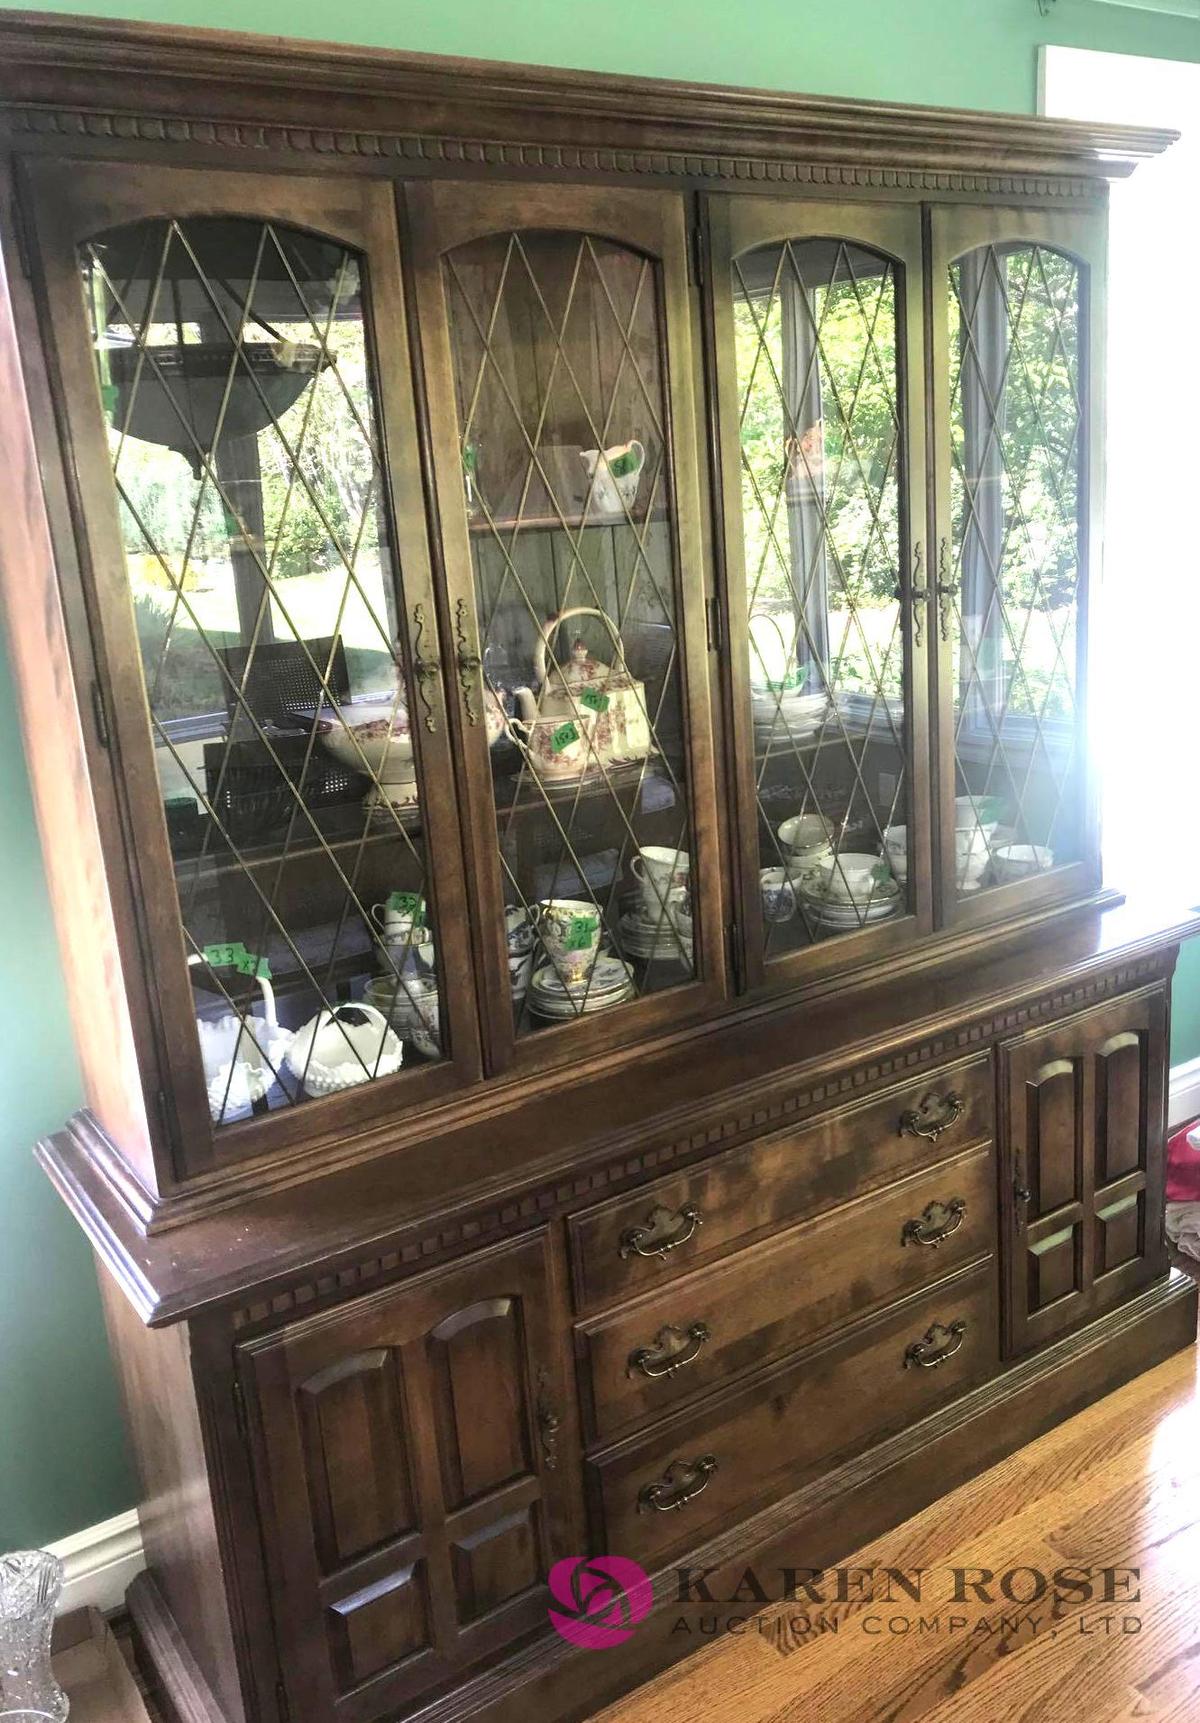 Lighted cabinet